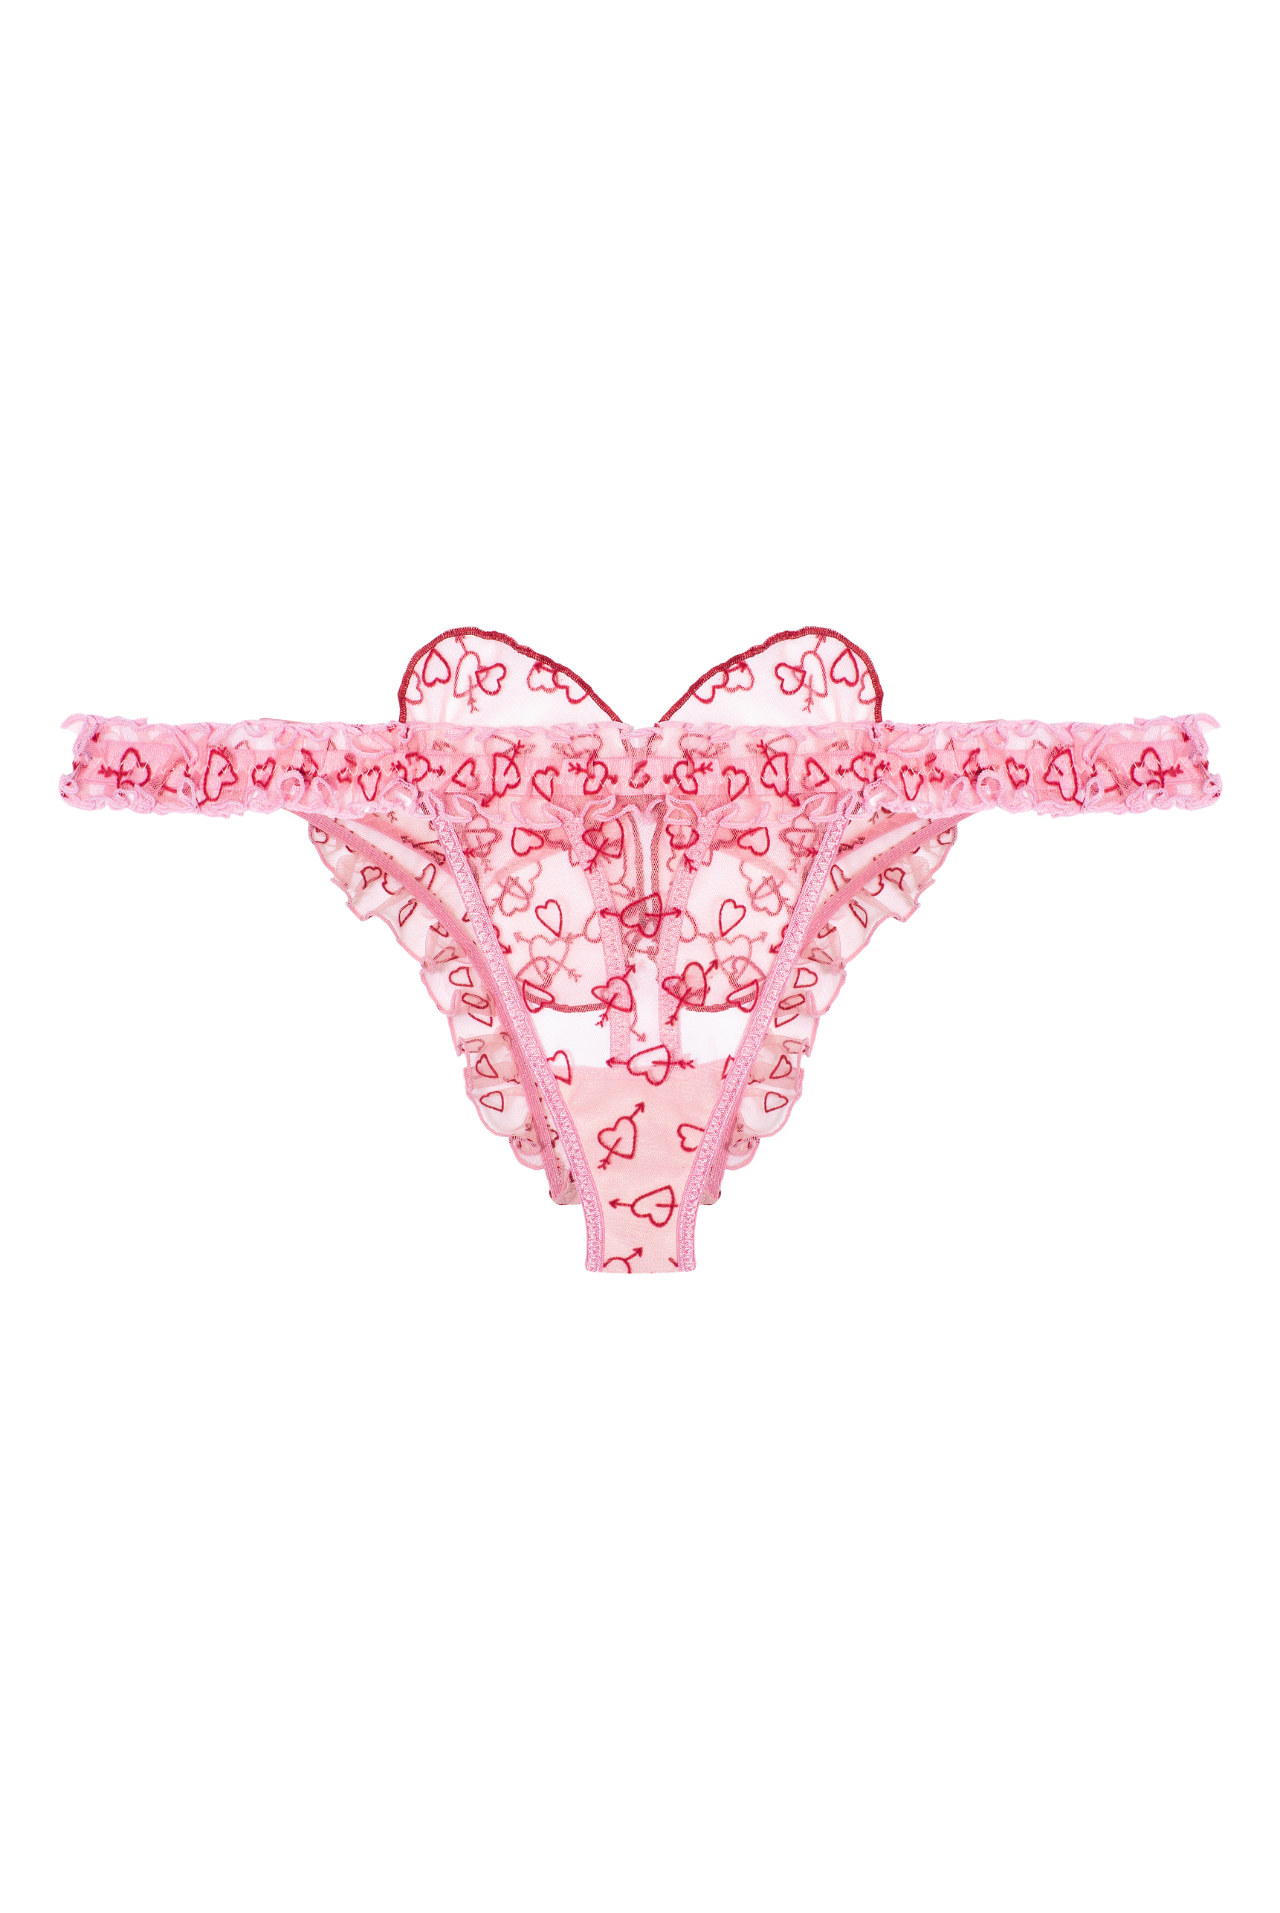 Victoria's Secret PINK - READY? 󾍒 10 for $35 panties exclusively